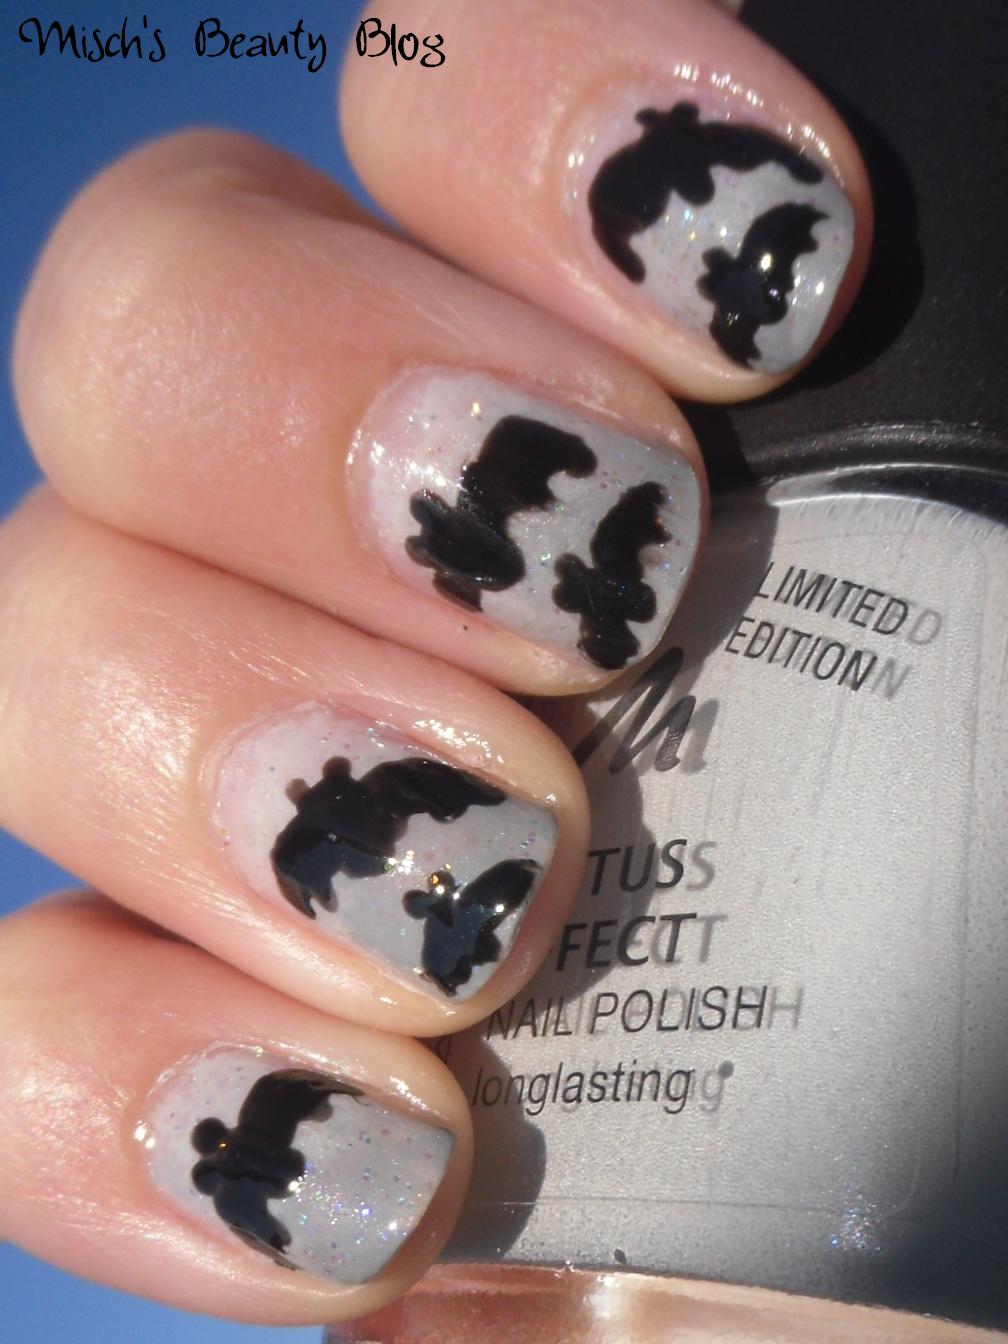 Today I want to show you another Halloween Nail Art design, and this time